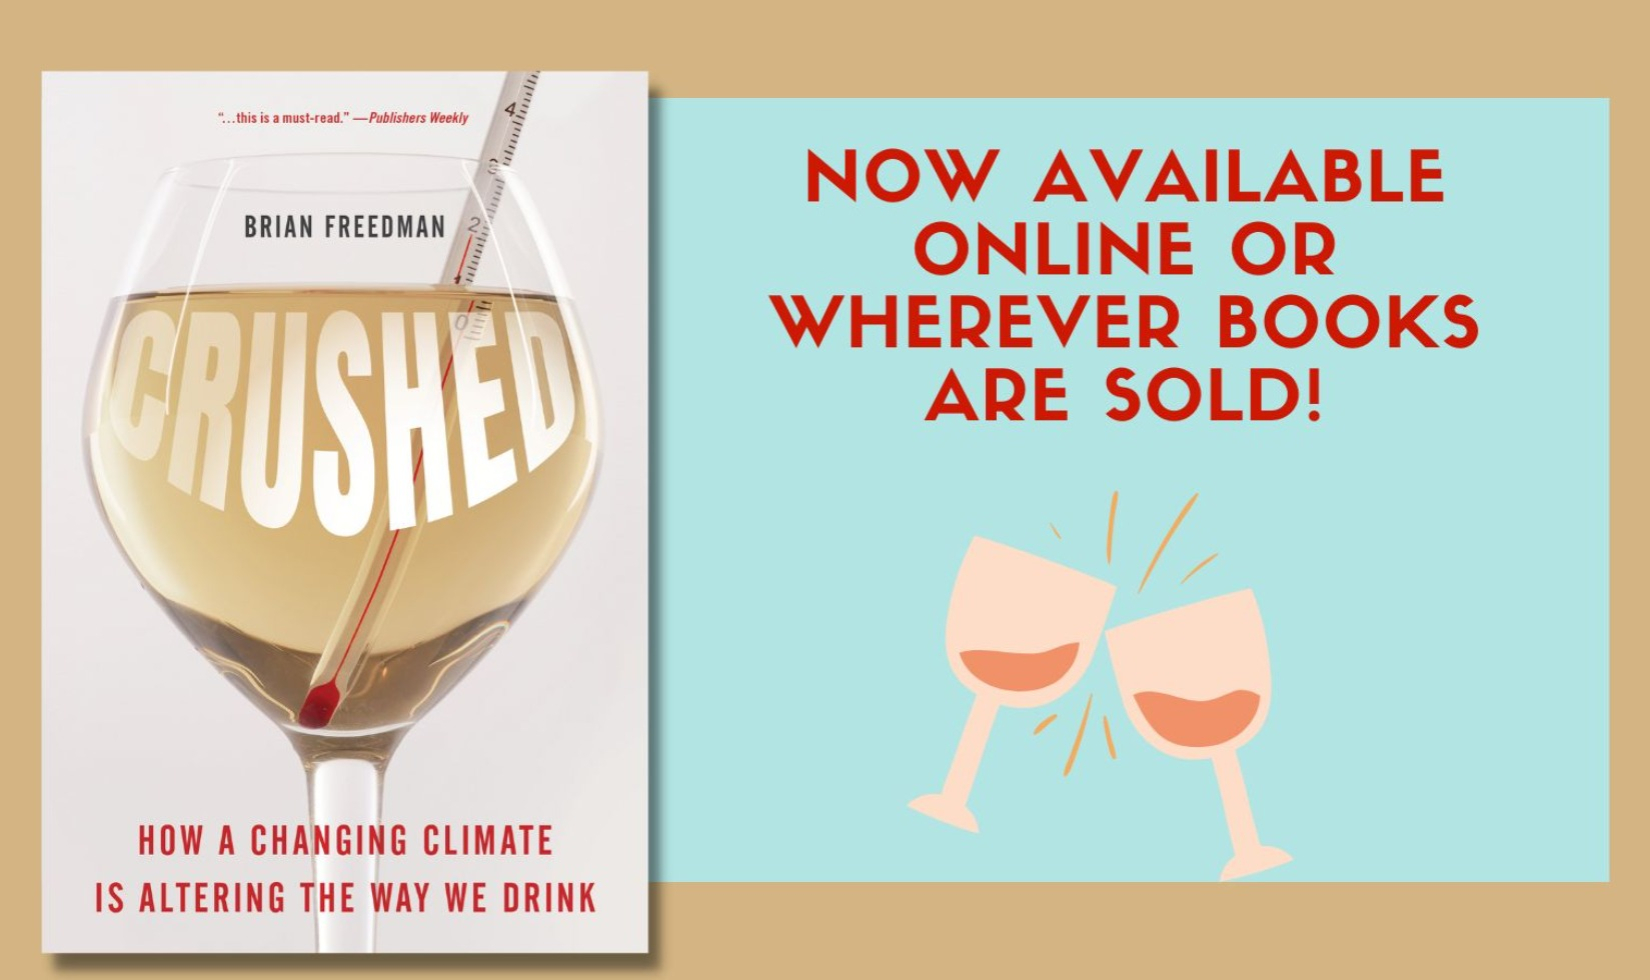 Cover of book Crushed: How A Changing Climate is Altering the Way We Drink, next to graphic that states now available online or wherever books are sold. 